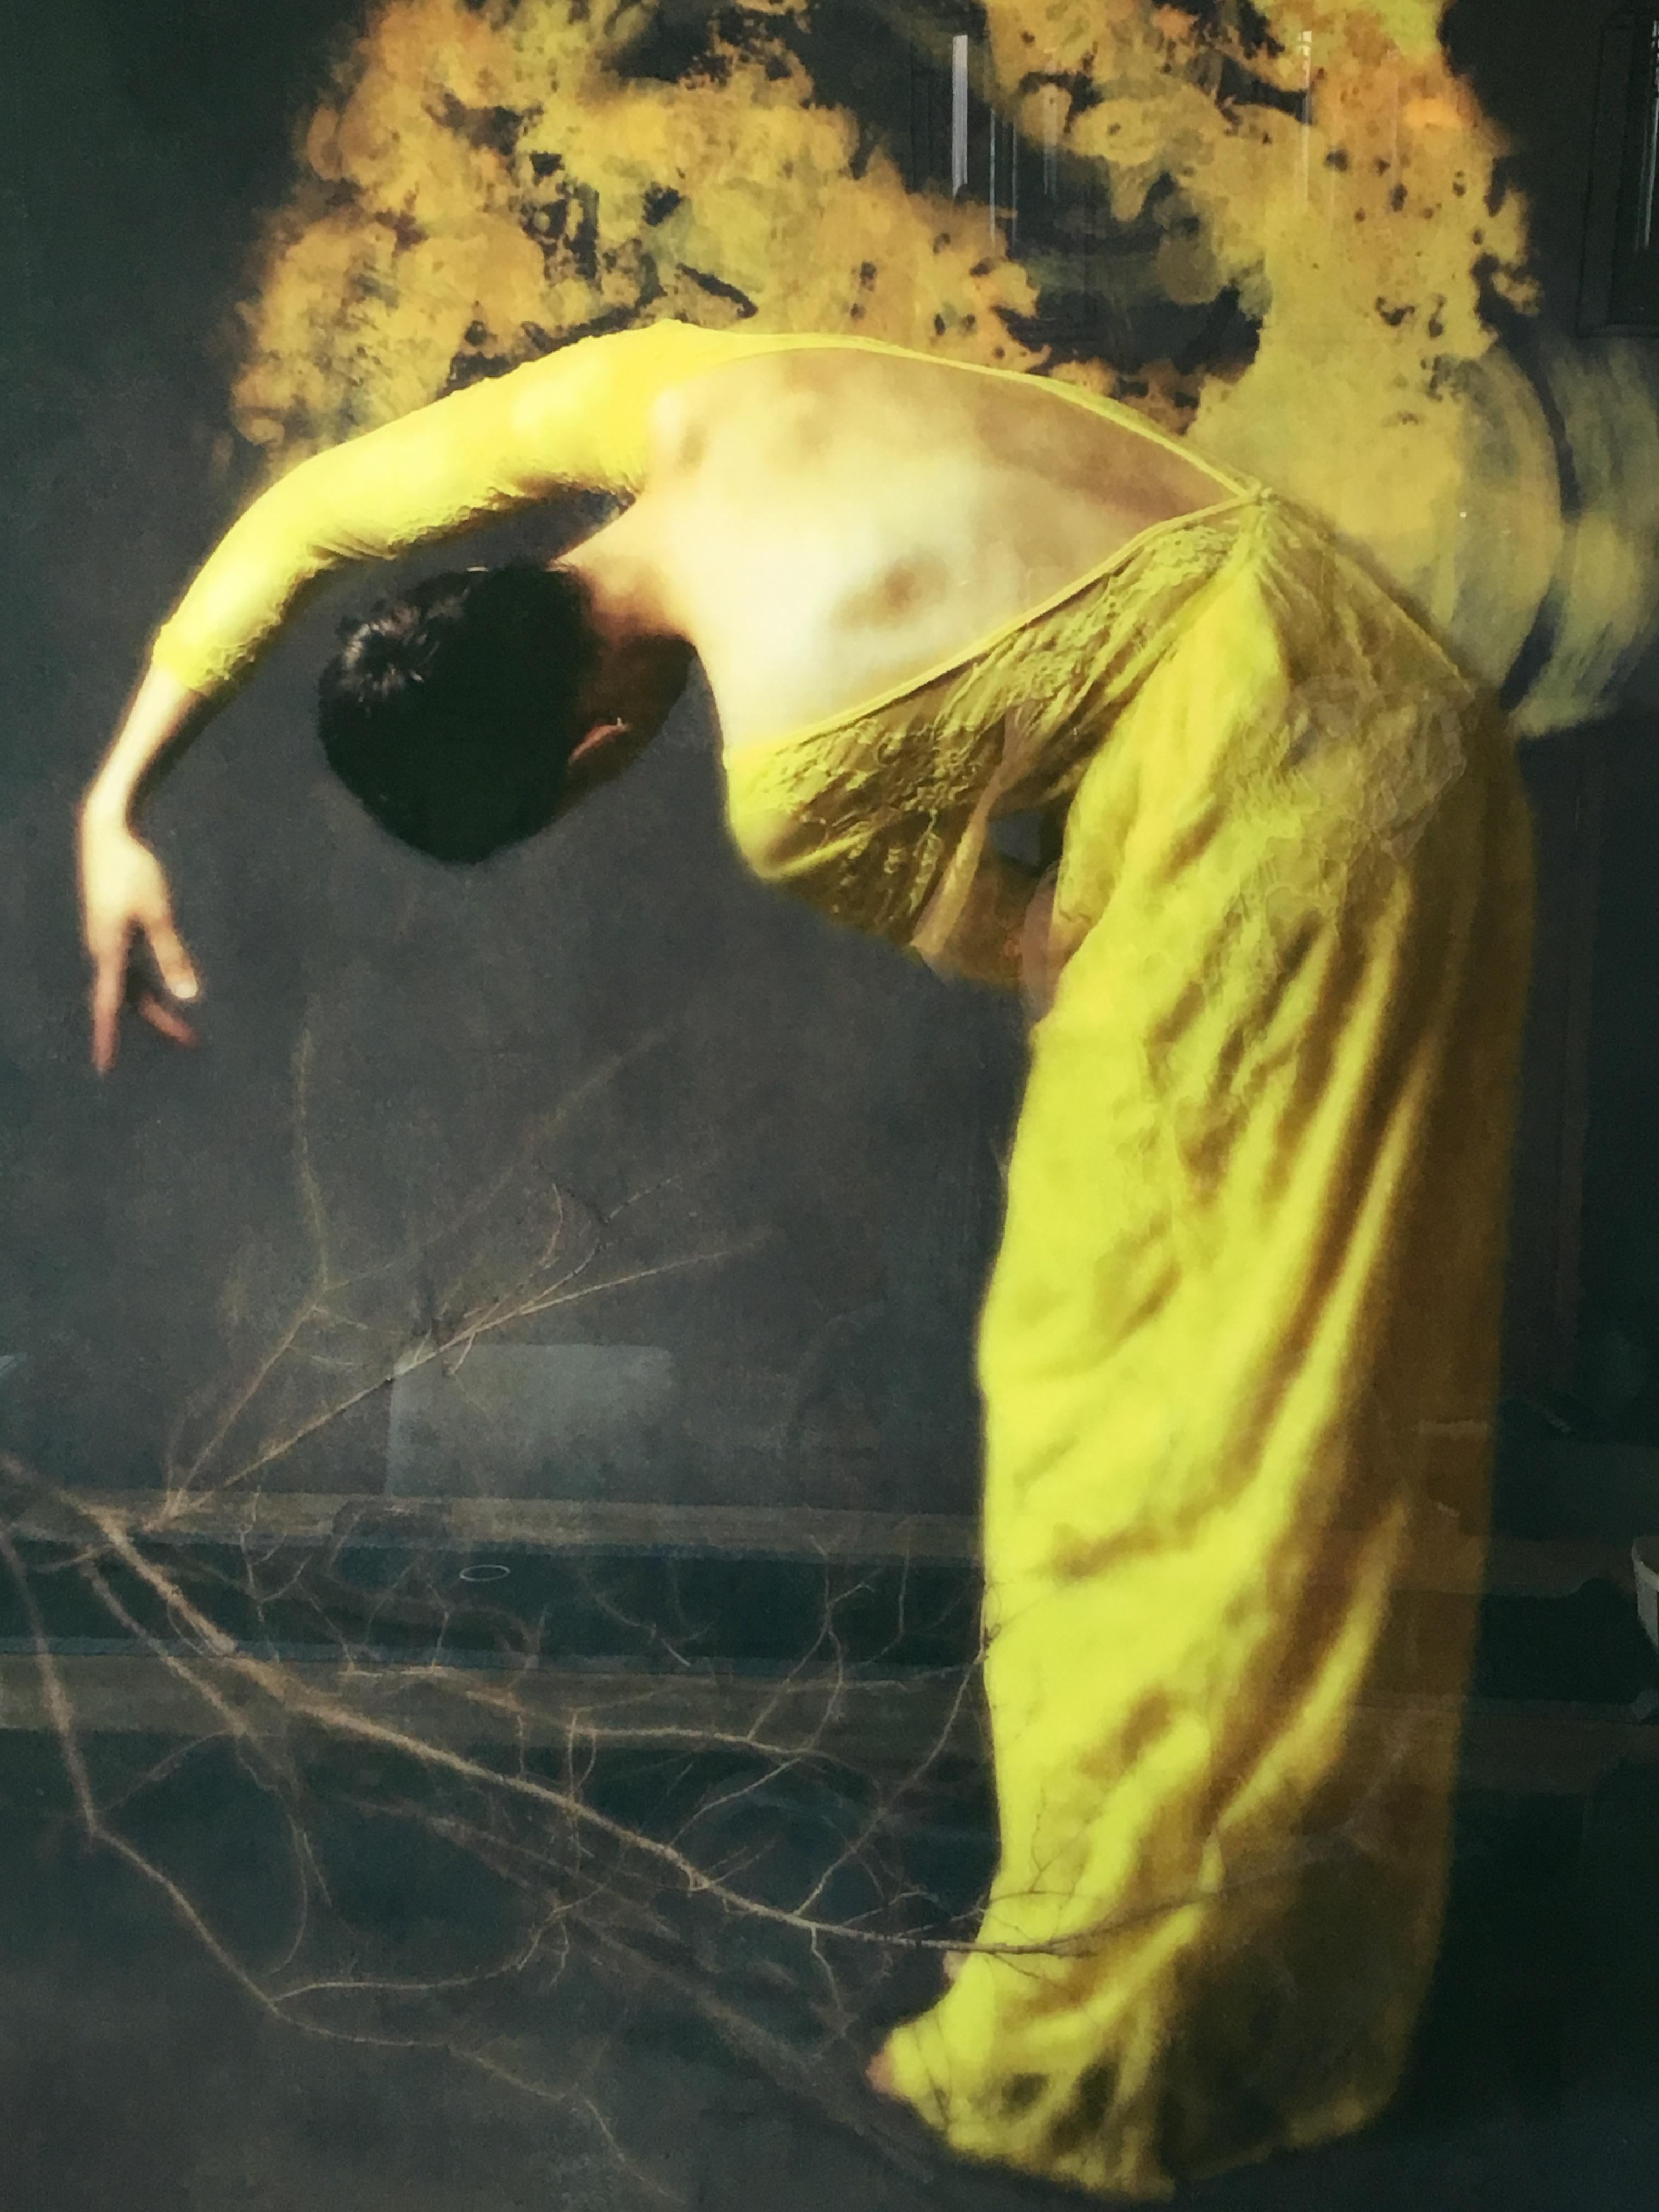 Artist: Josephine Cardin

Medium: Mixed Media of Photography and Painting

Size: 150 x 100 cm

Limited edition 2 of 15

____________________________________________________________________________________________

Cardin uses a mix between